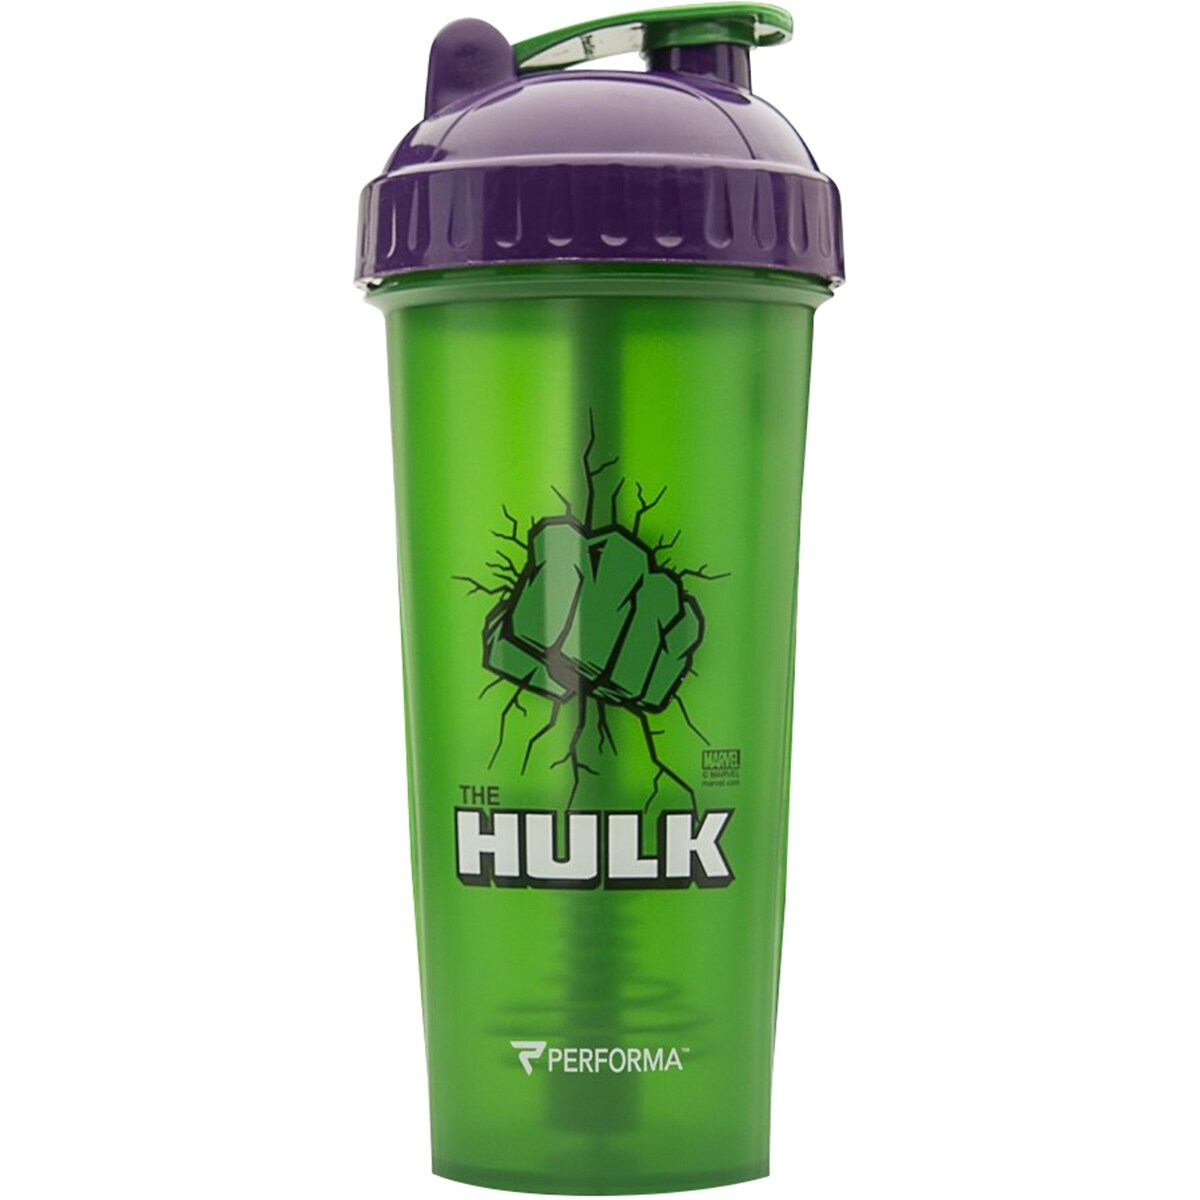  BlenderBottle Marvel Shaker Bottle Pro Series Perfect for  Protein Shakes and Pre Workout, 28-Ounce, Hulk Fist: Home & Kitchen